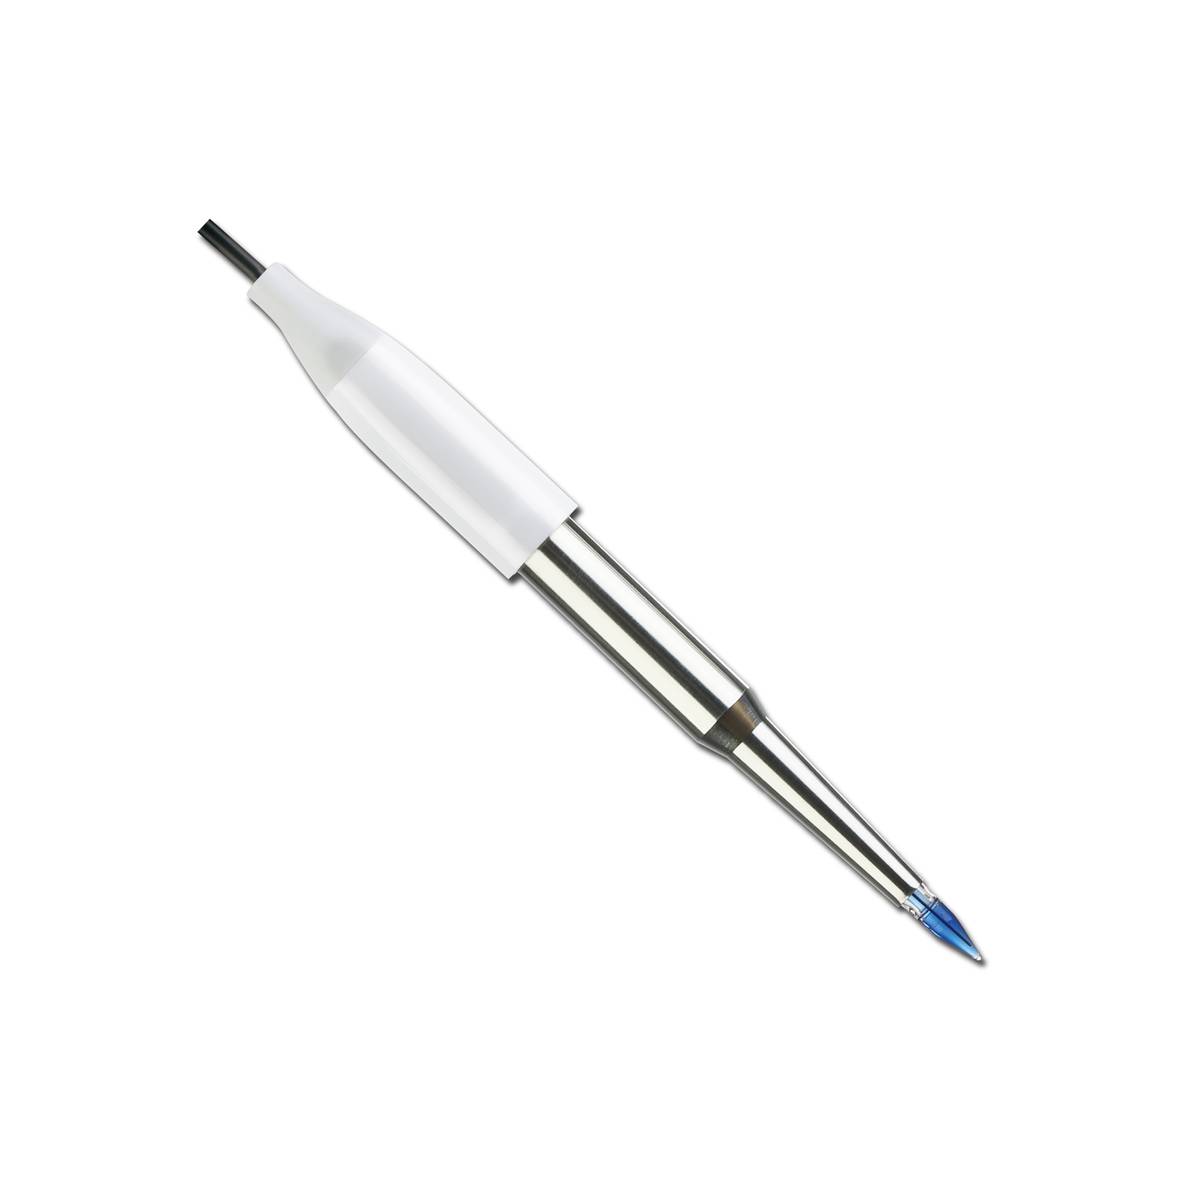 Picture of Apera Instruments LabSen 753 12 x 115 mm Stainless Steel Spear pH Temperature Electrode for Solid Food Samples